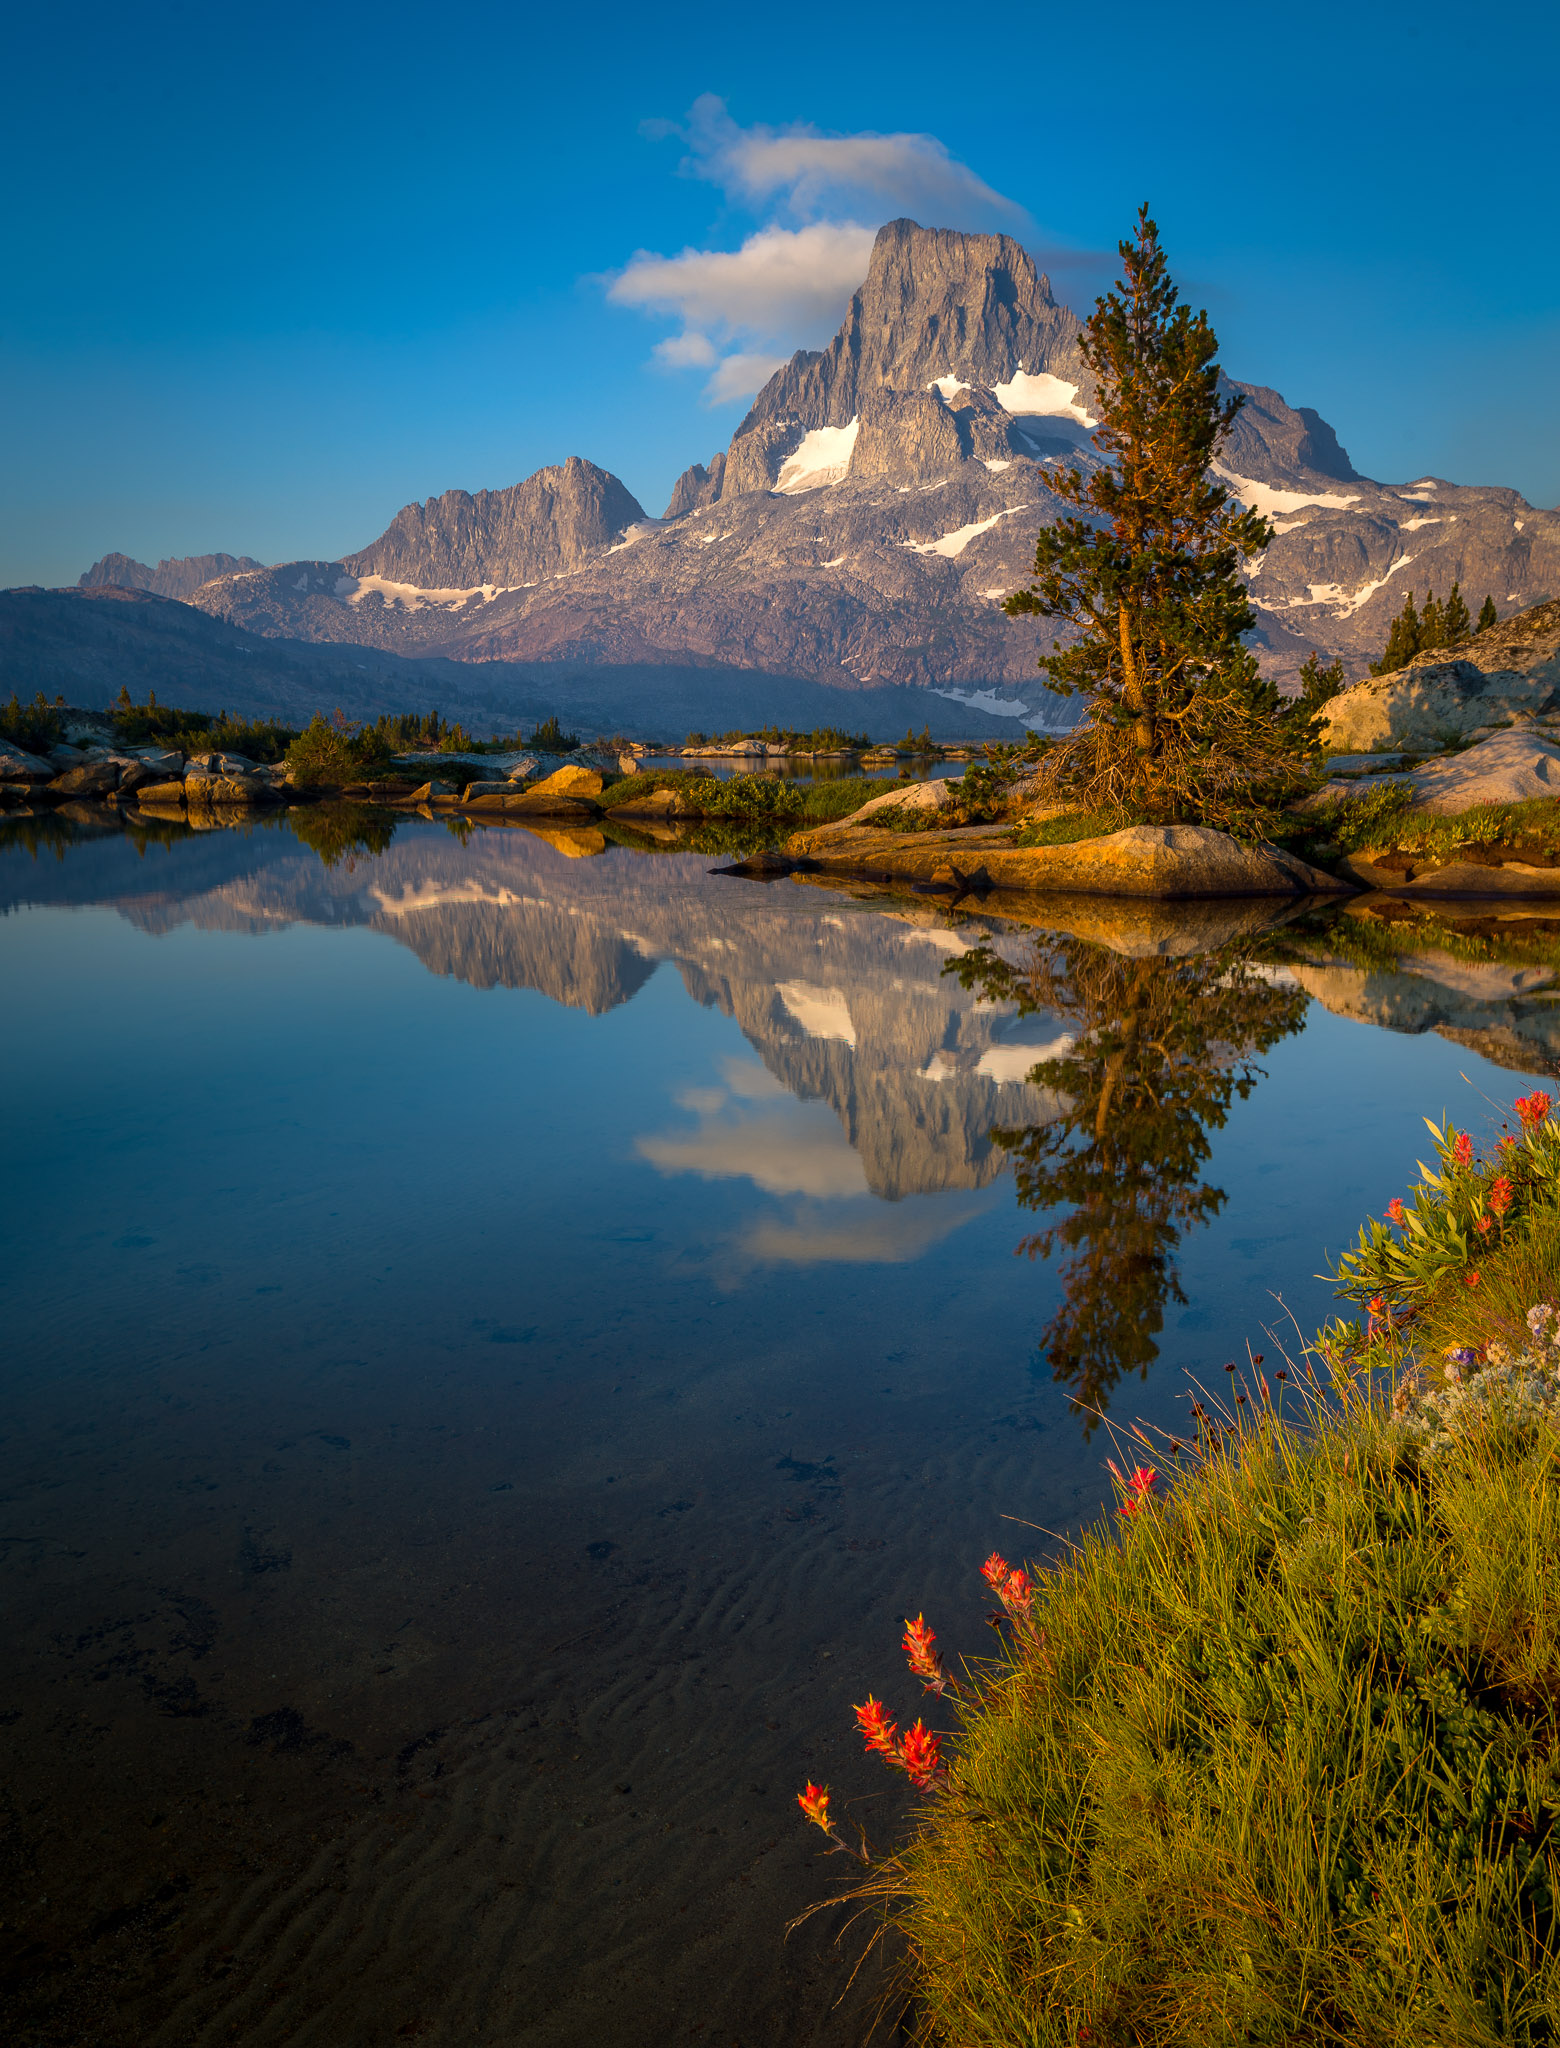 Wildflowers & Banner Peak from Thousand Island Lake (focus-blended)